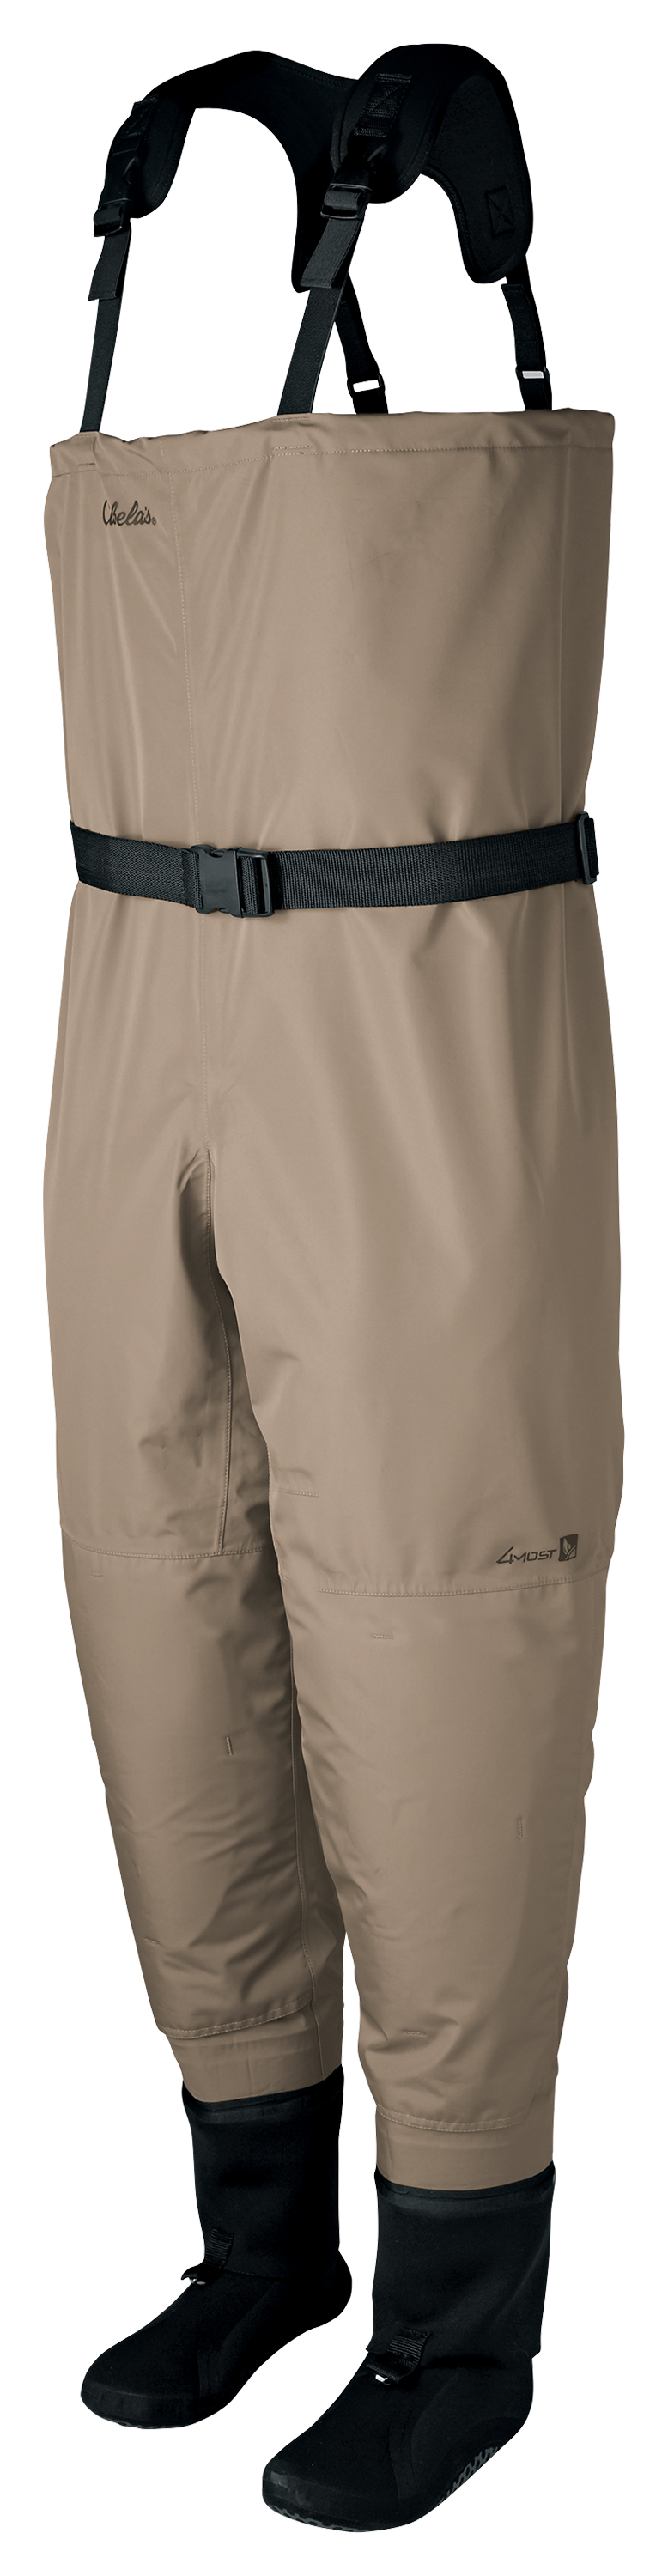 Cabela's Premium Breathable Stocking-Foot Fishing Waders for Men - Tan - Extra Large